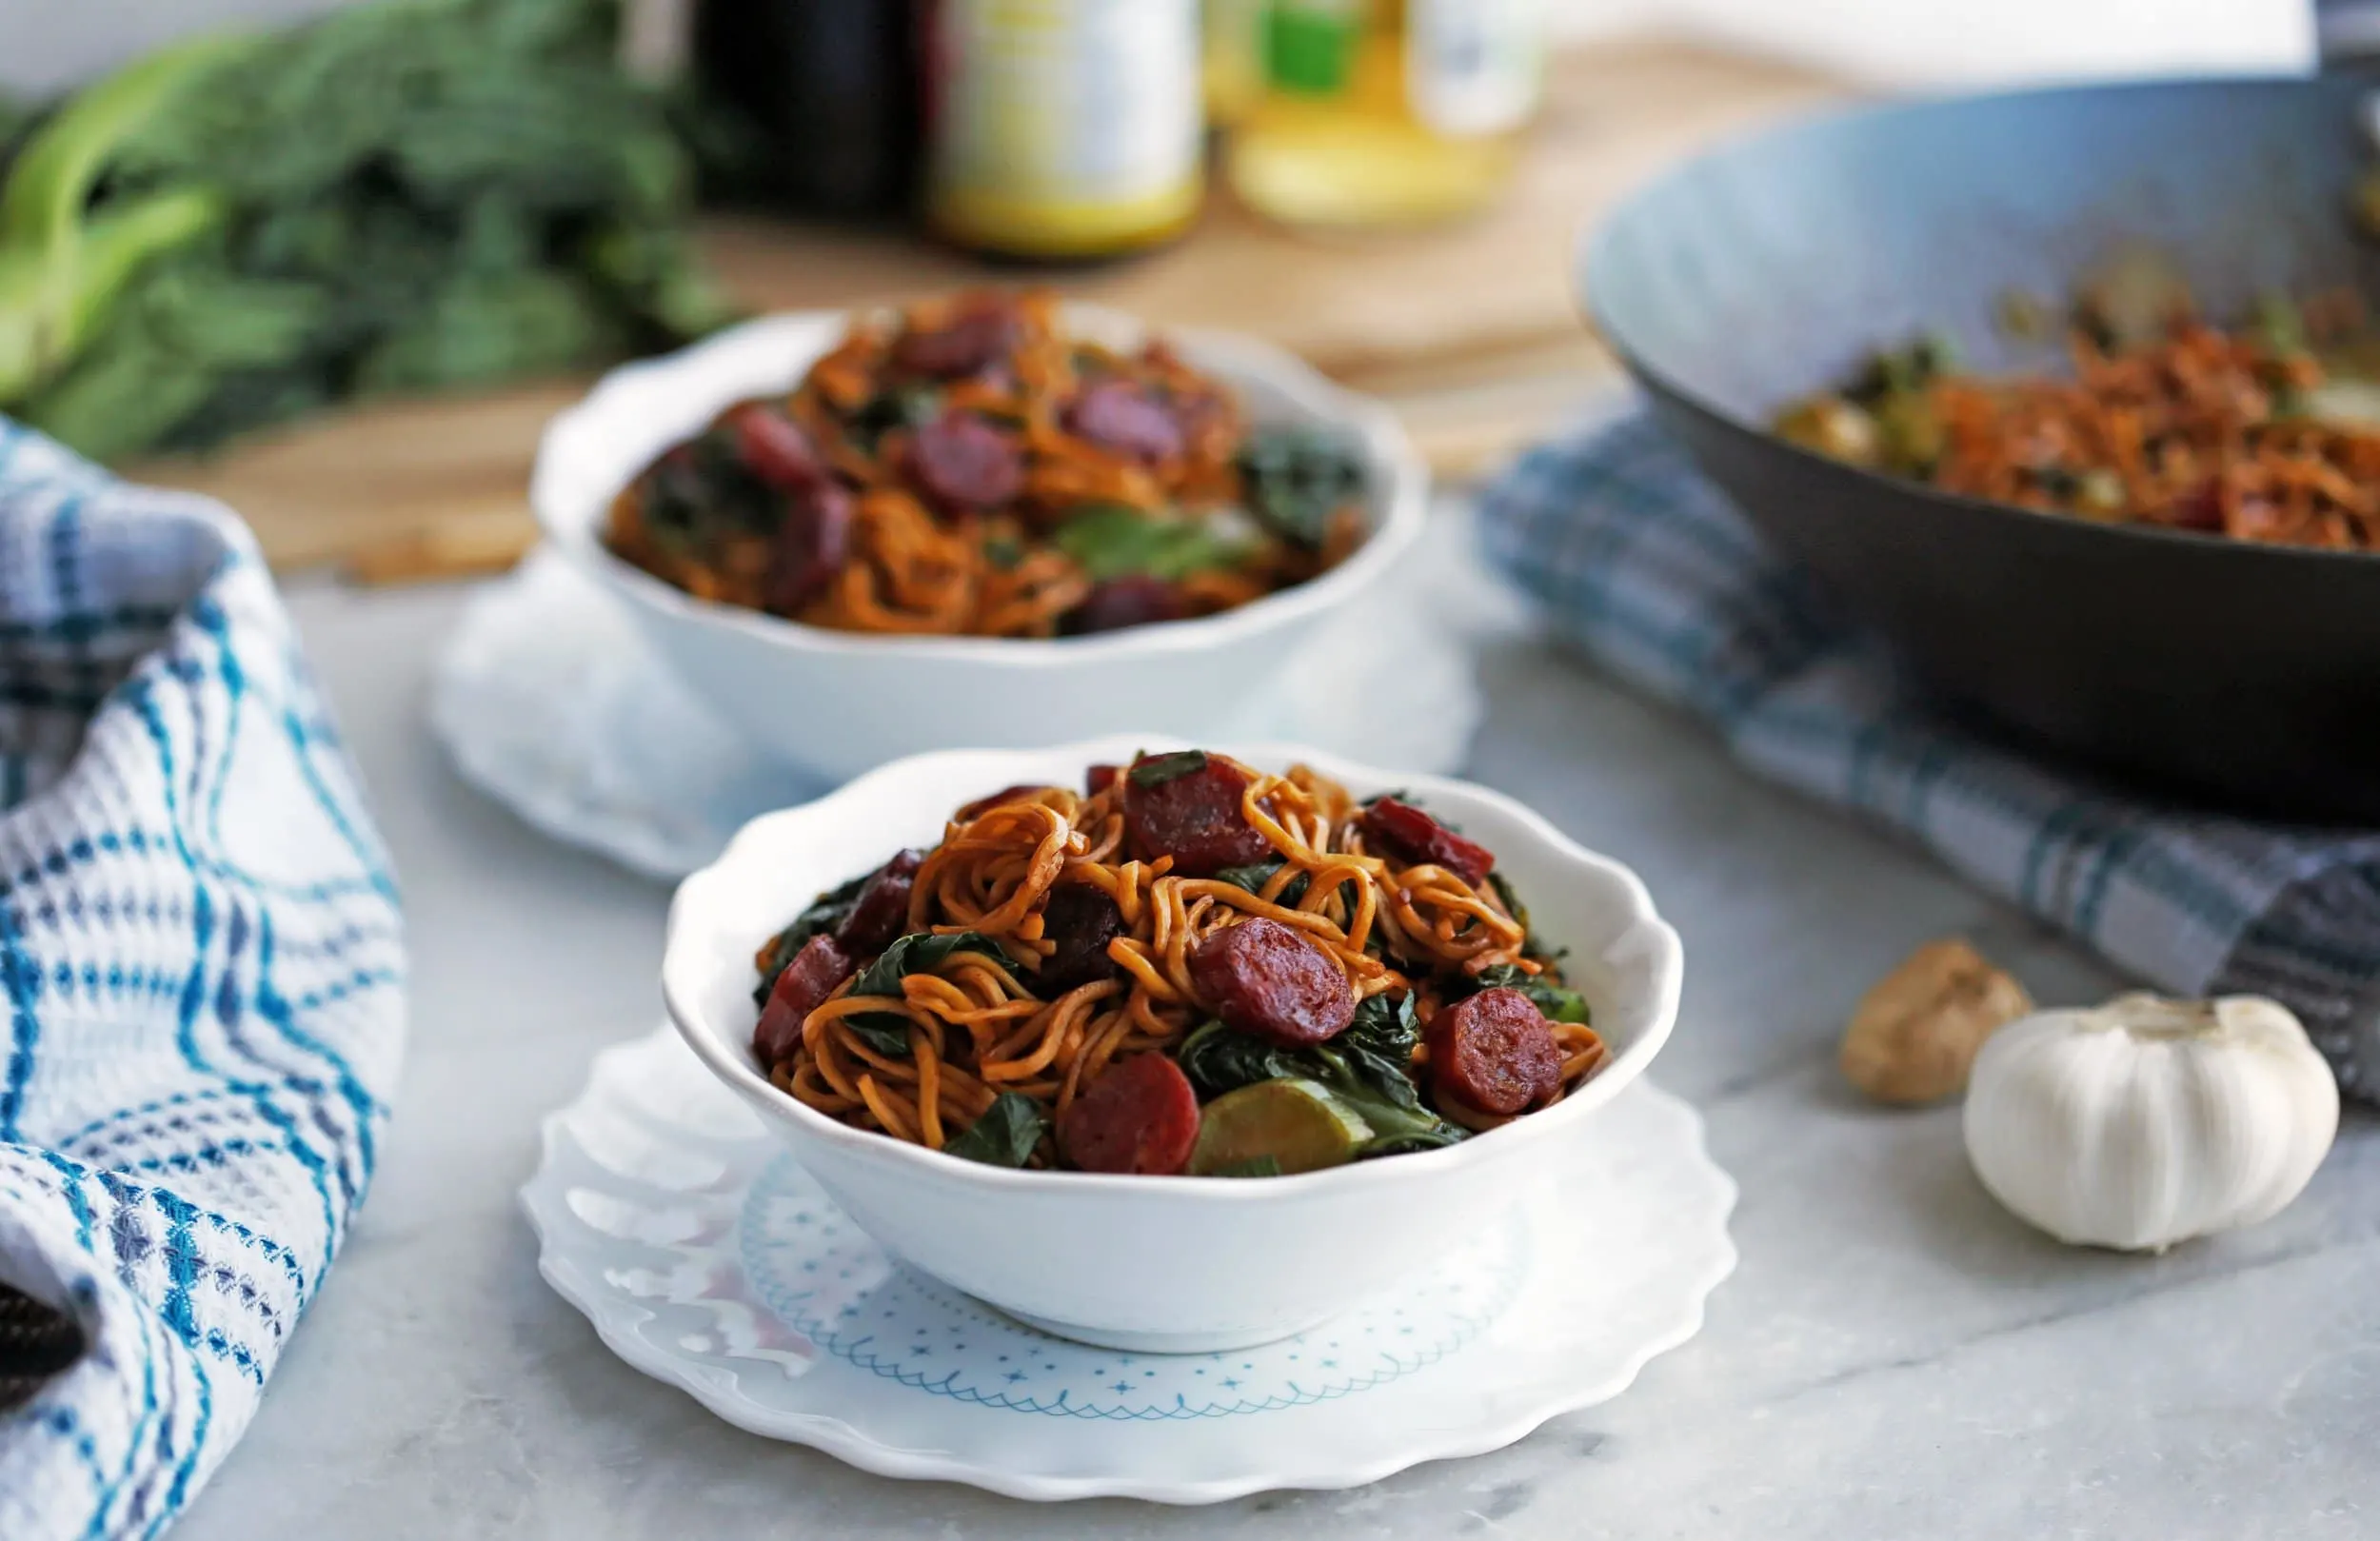 Two bowls of Lo mein noodles with Chinese sausage (lap cheong) and gai lan (Chinese broccoli).